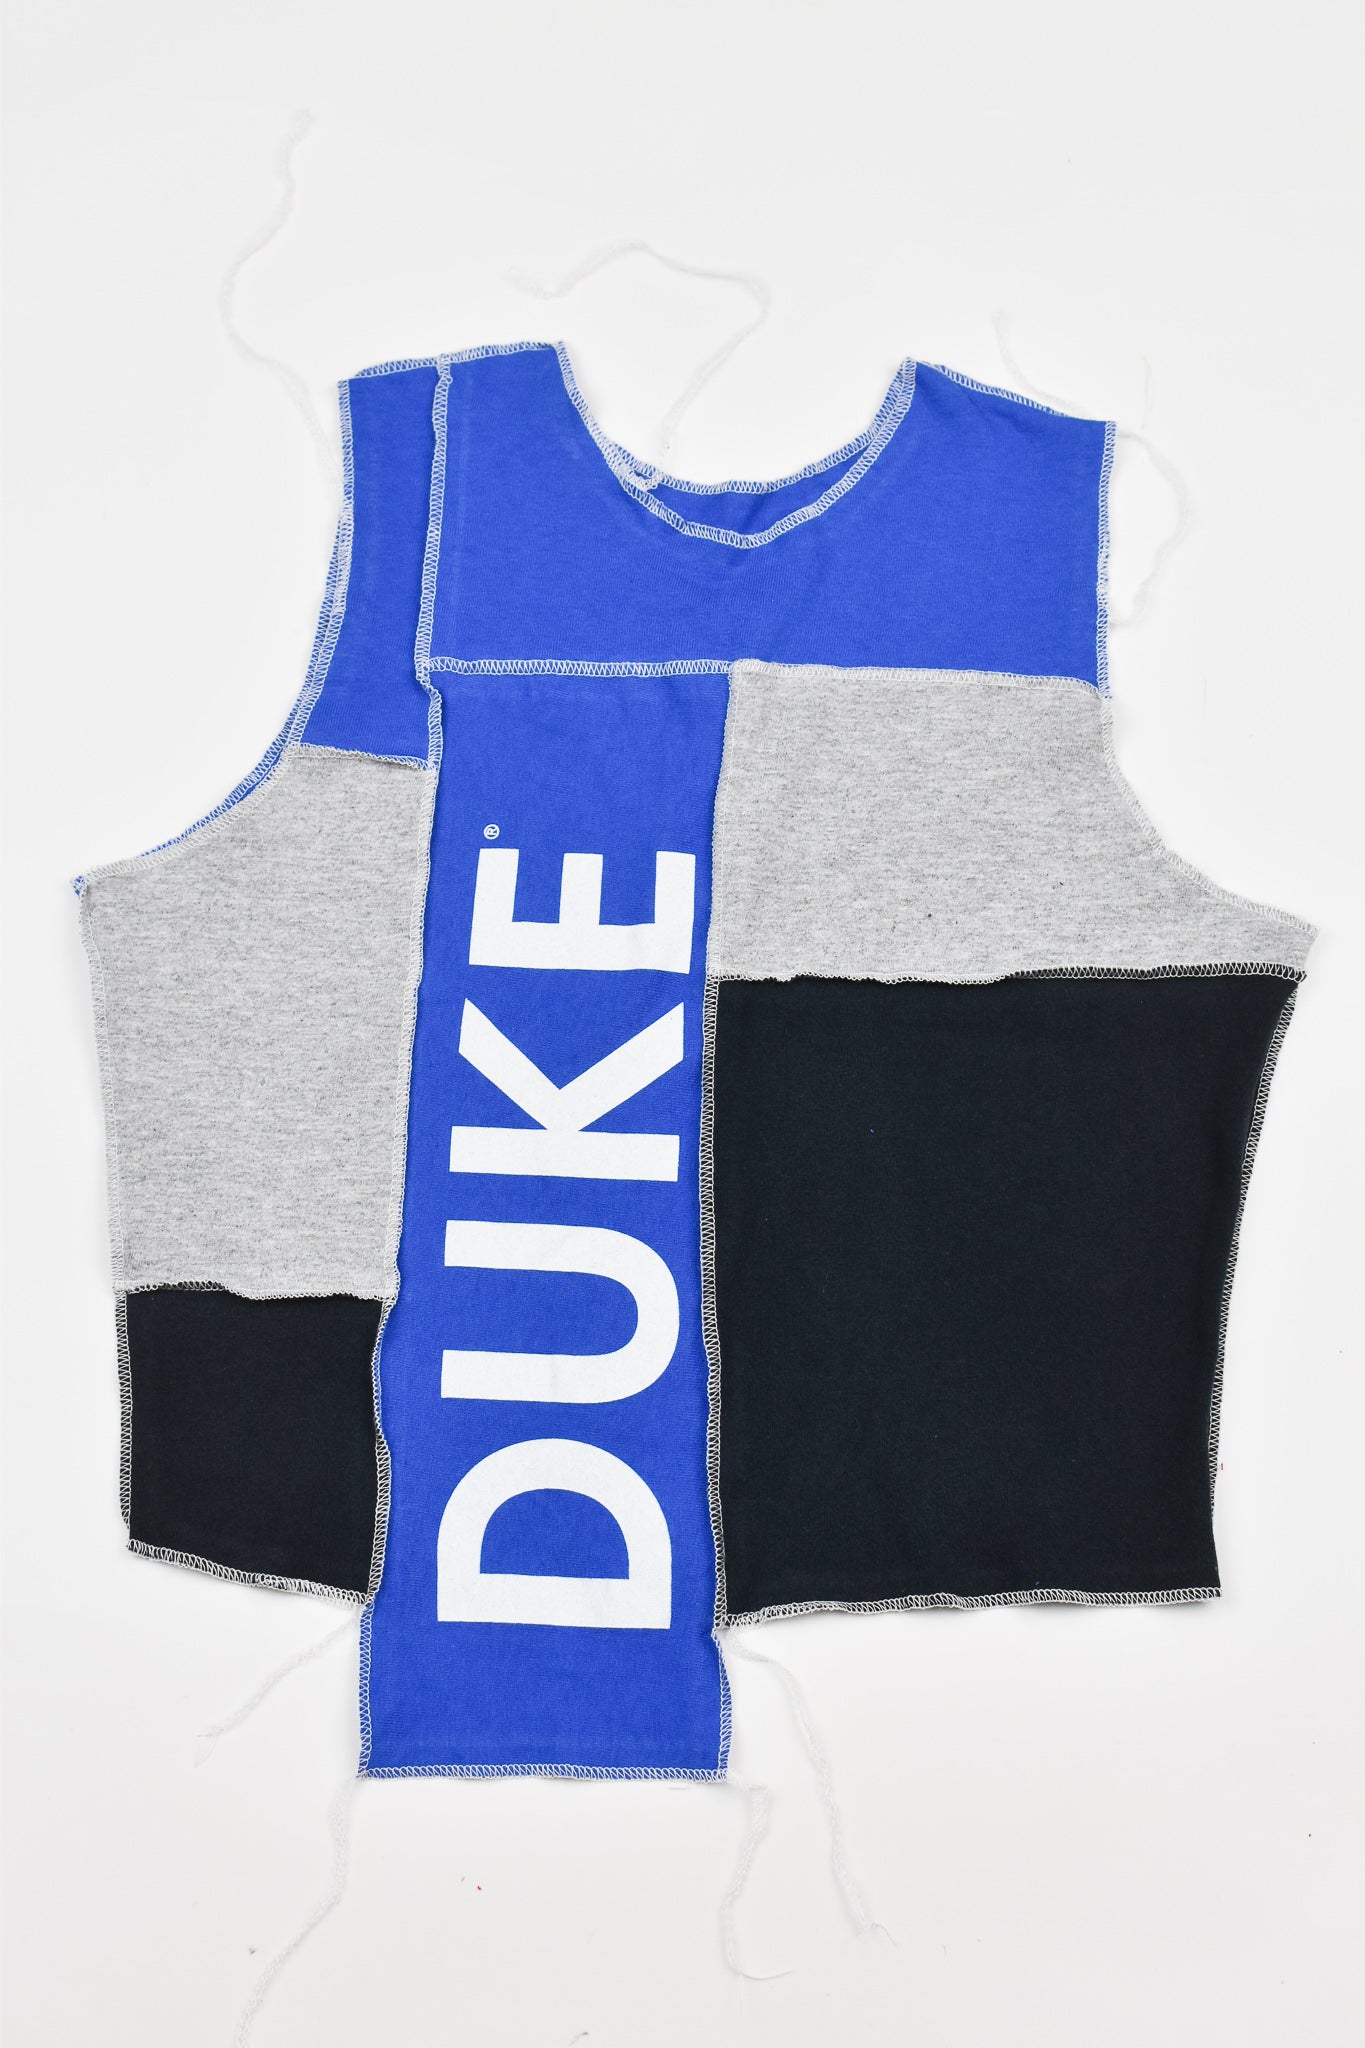 Upcycled Duke Scrappy Tank Top